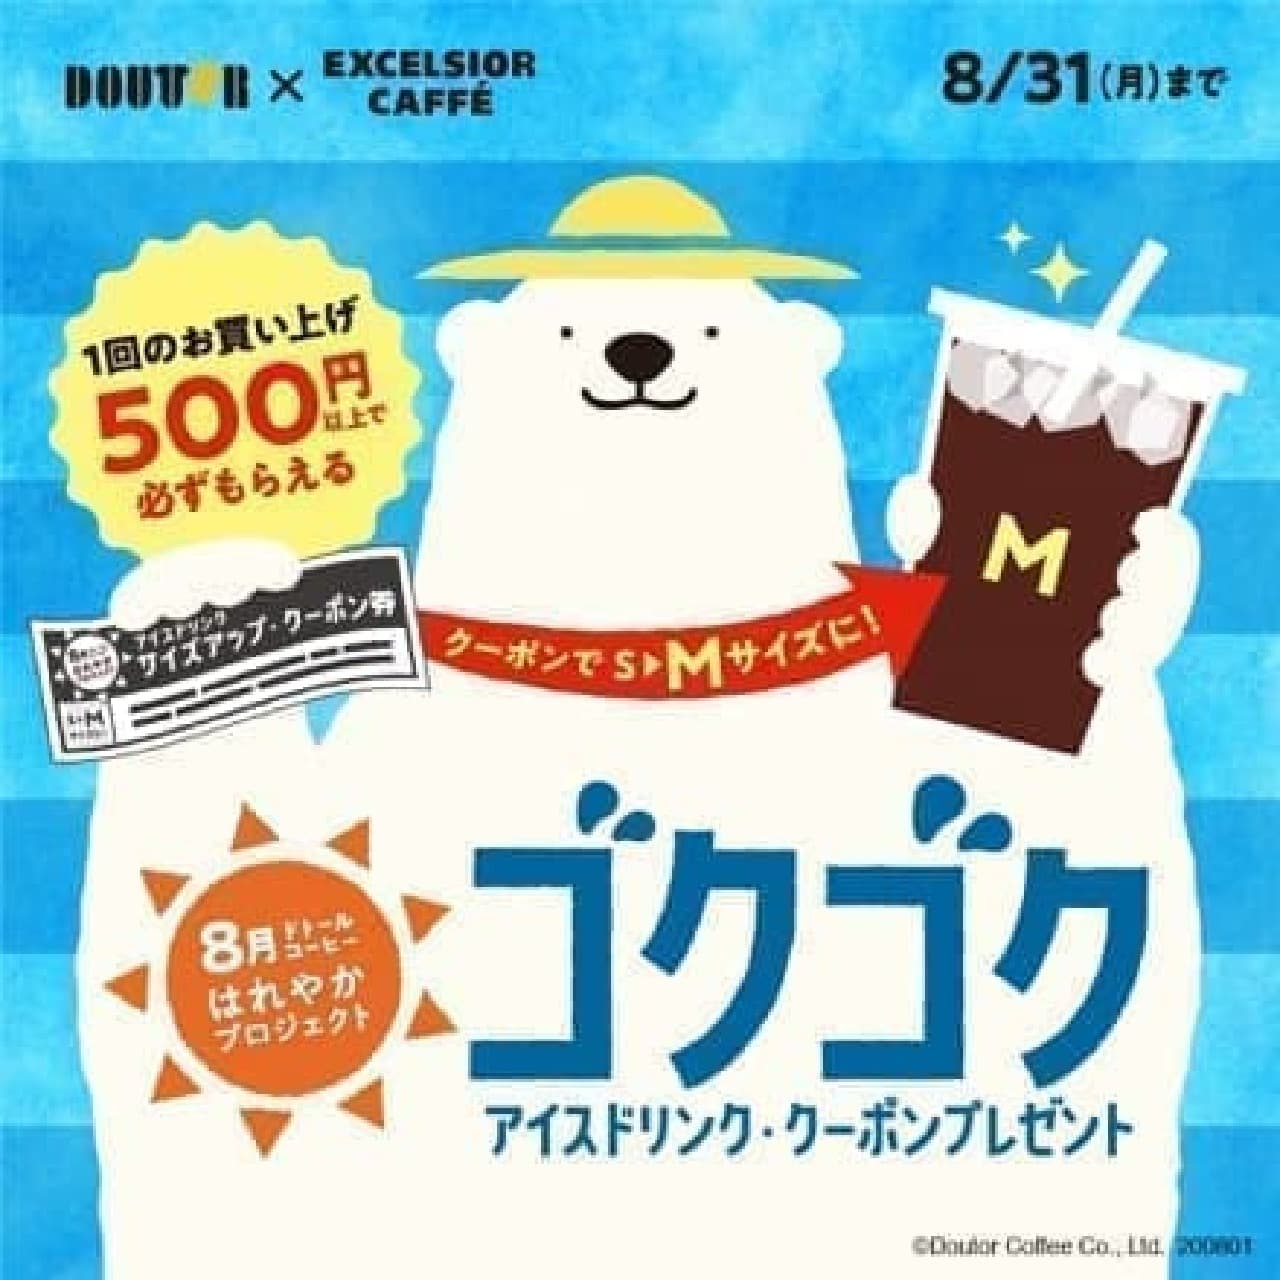 Doutor Coffee Shop and Excelsior Cafe "Ice Drink Coupon Present"